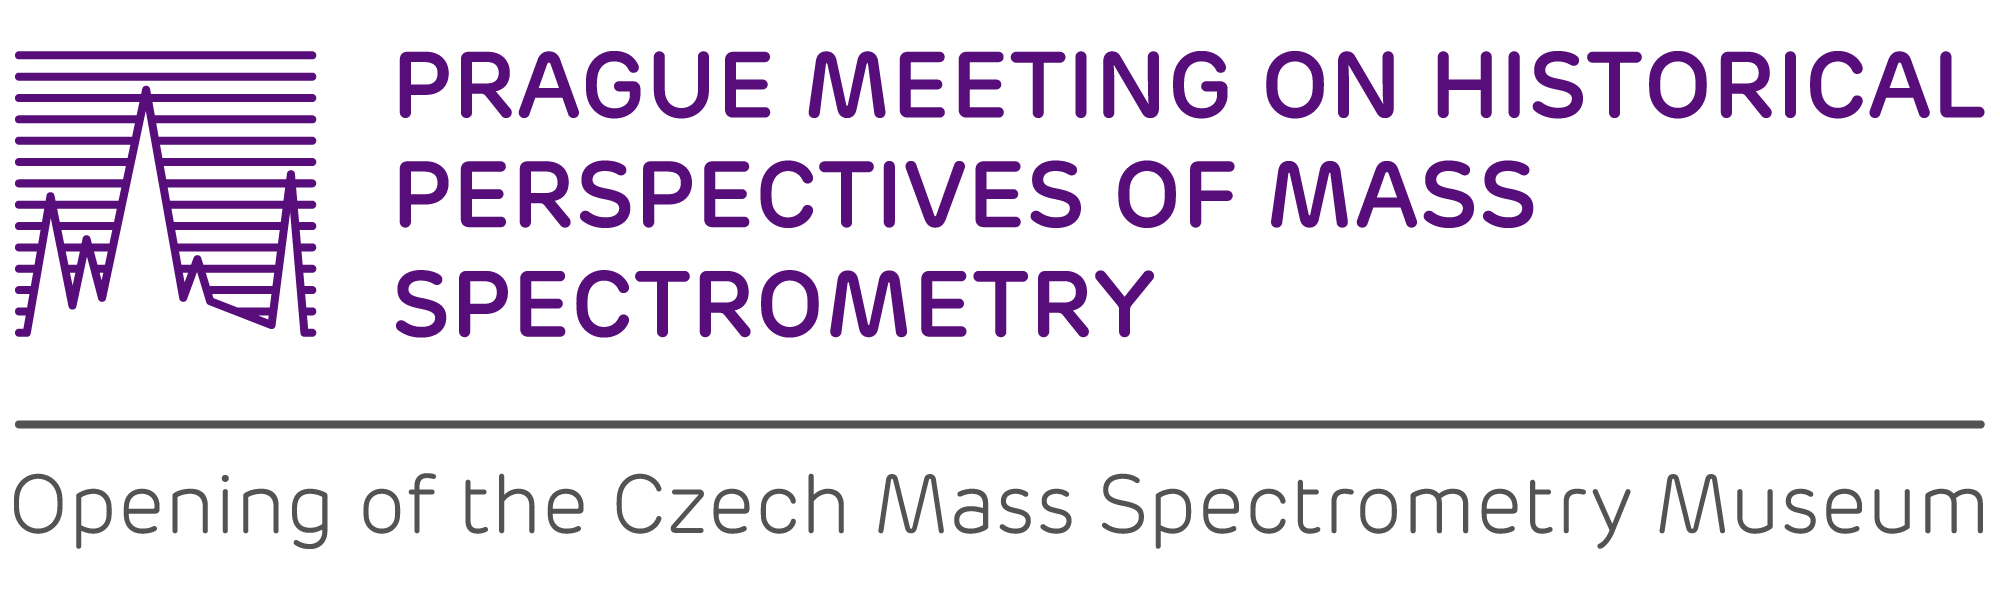 Konference: Prague Meeting on Historical Perspectives of Mass Spectrometry